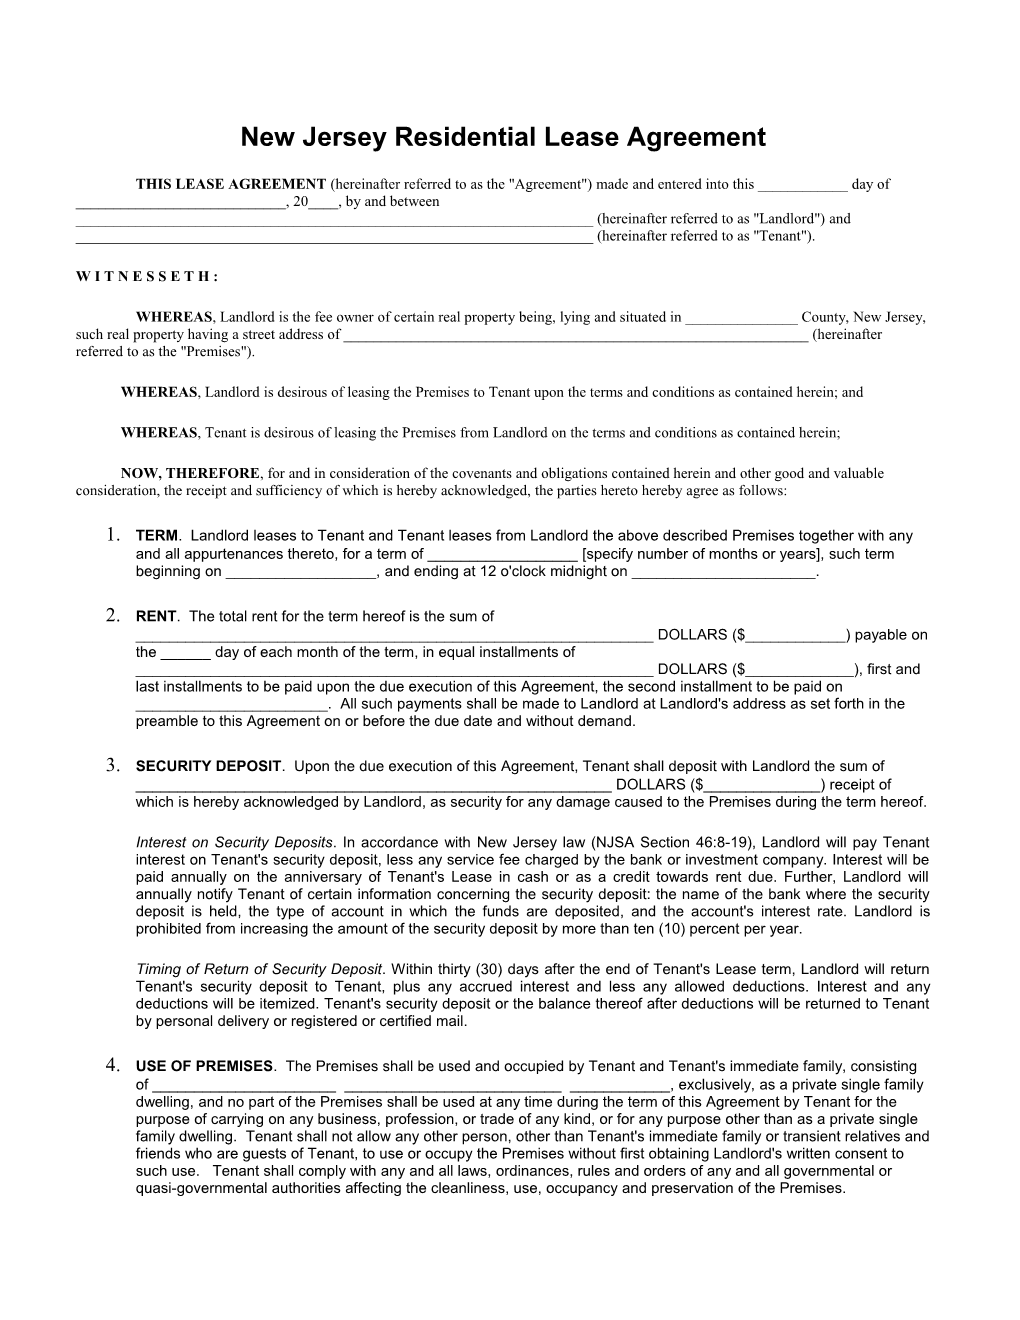 New Jersey Residential Lease Agreement